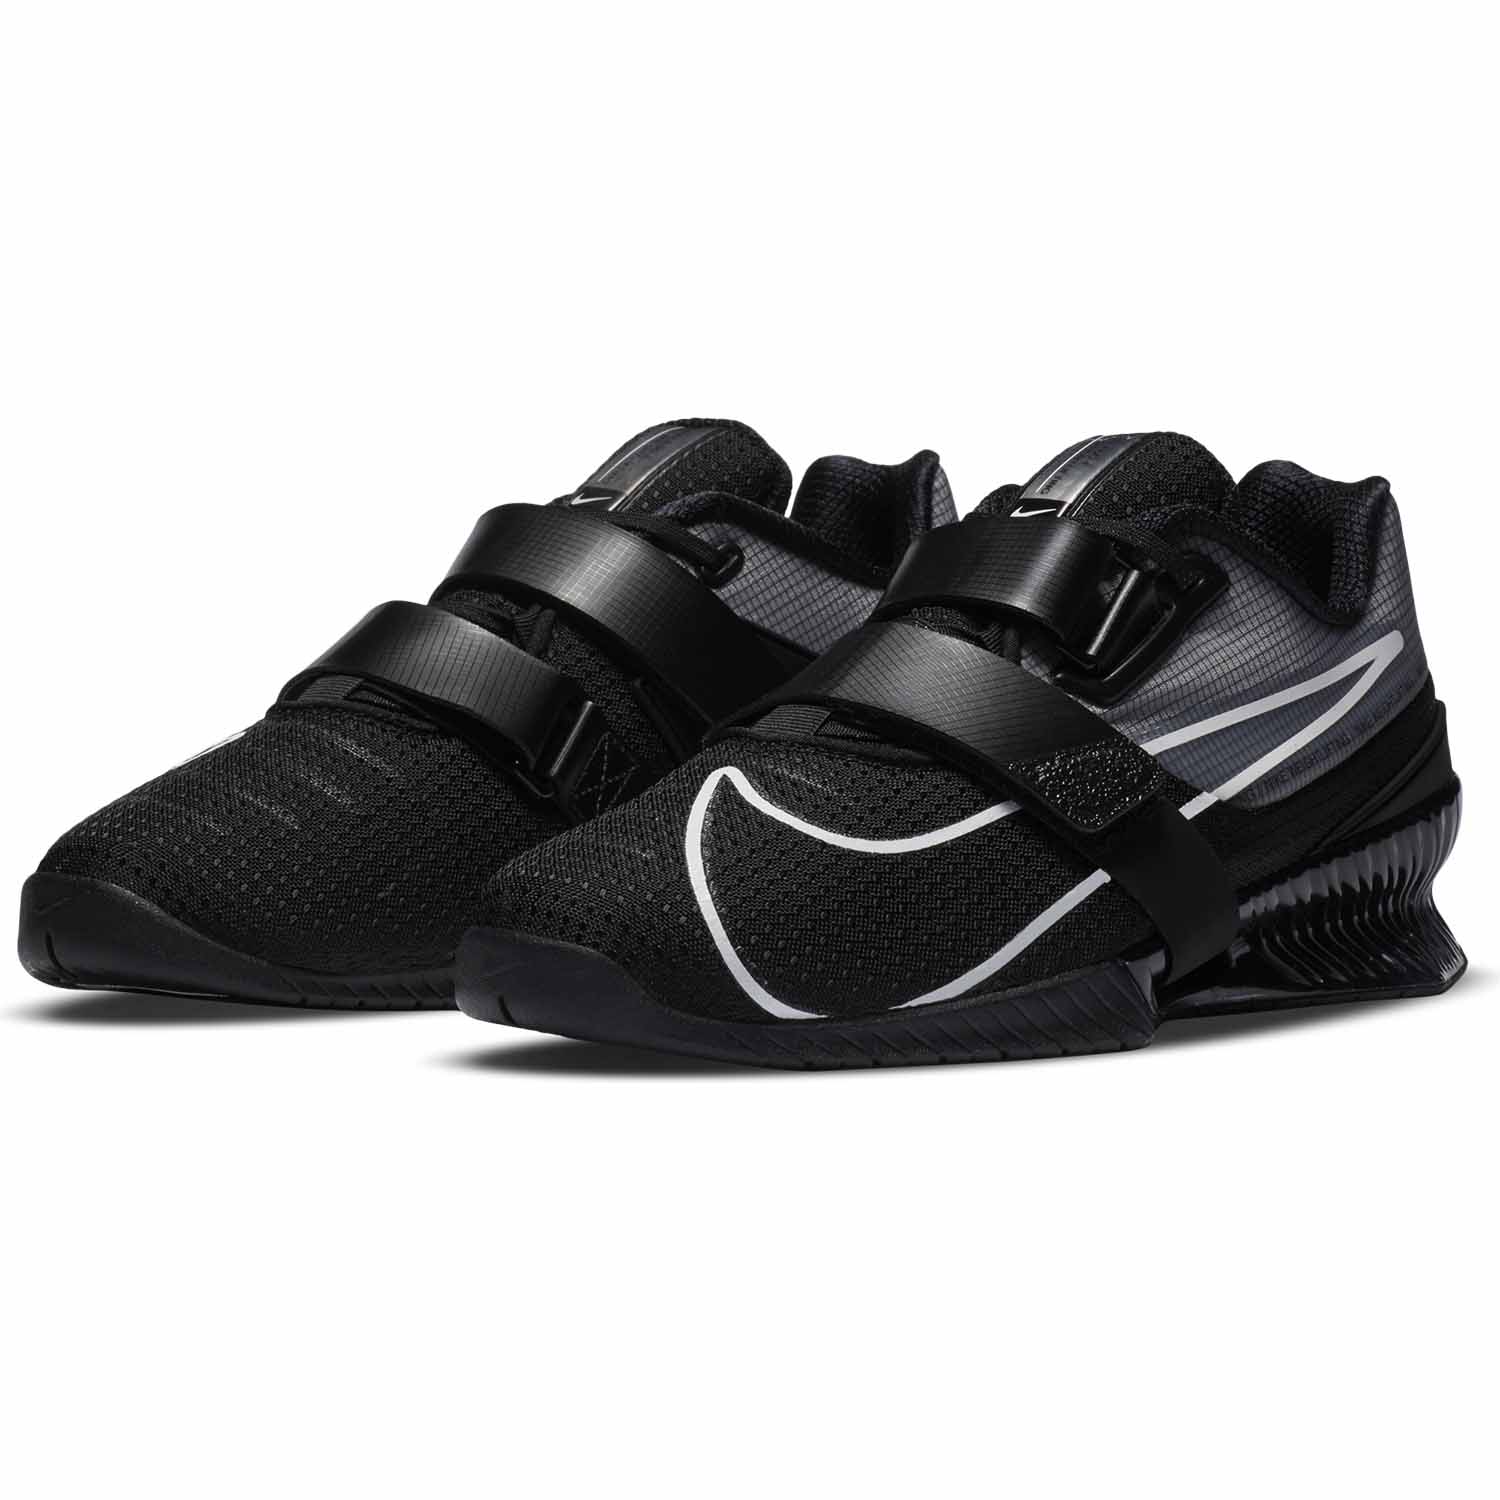 Weightlifting Shoes & Trainers. Nike CA